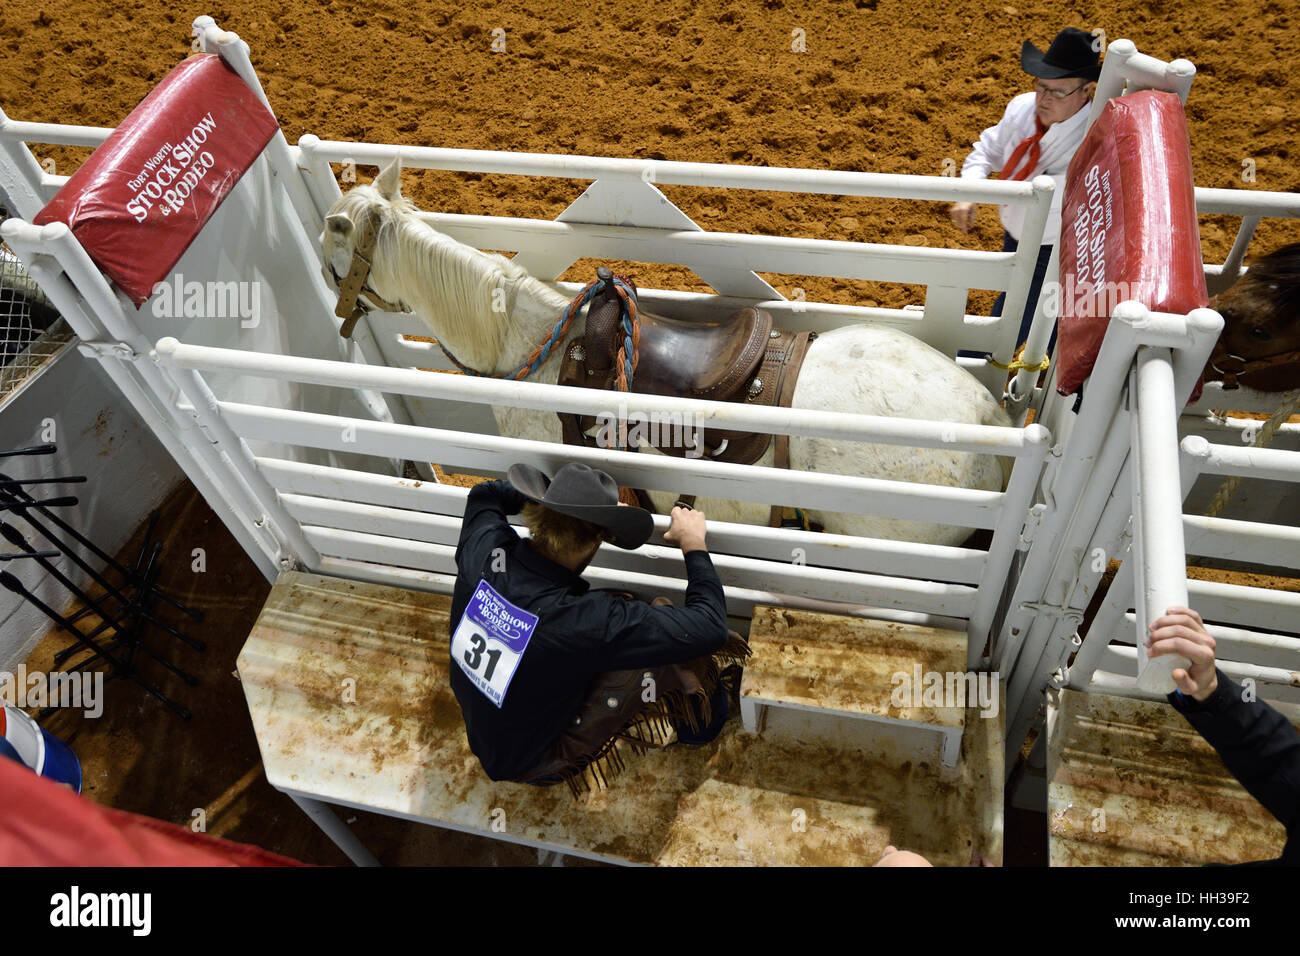 Ft. Worth, Texas, USA. 16th January, 2017.  A cowboy awaits the first bronc ride at the Cowboys of Color Rodeo on Martin Luther King Jr. Day at the Ft. Worth Stock Show and Rodeo. Credit:  Hum Images/Alamy Live News Stock Photo